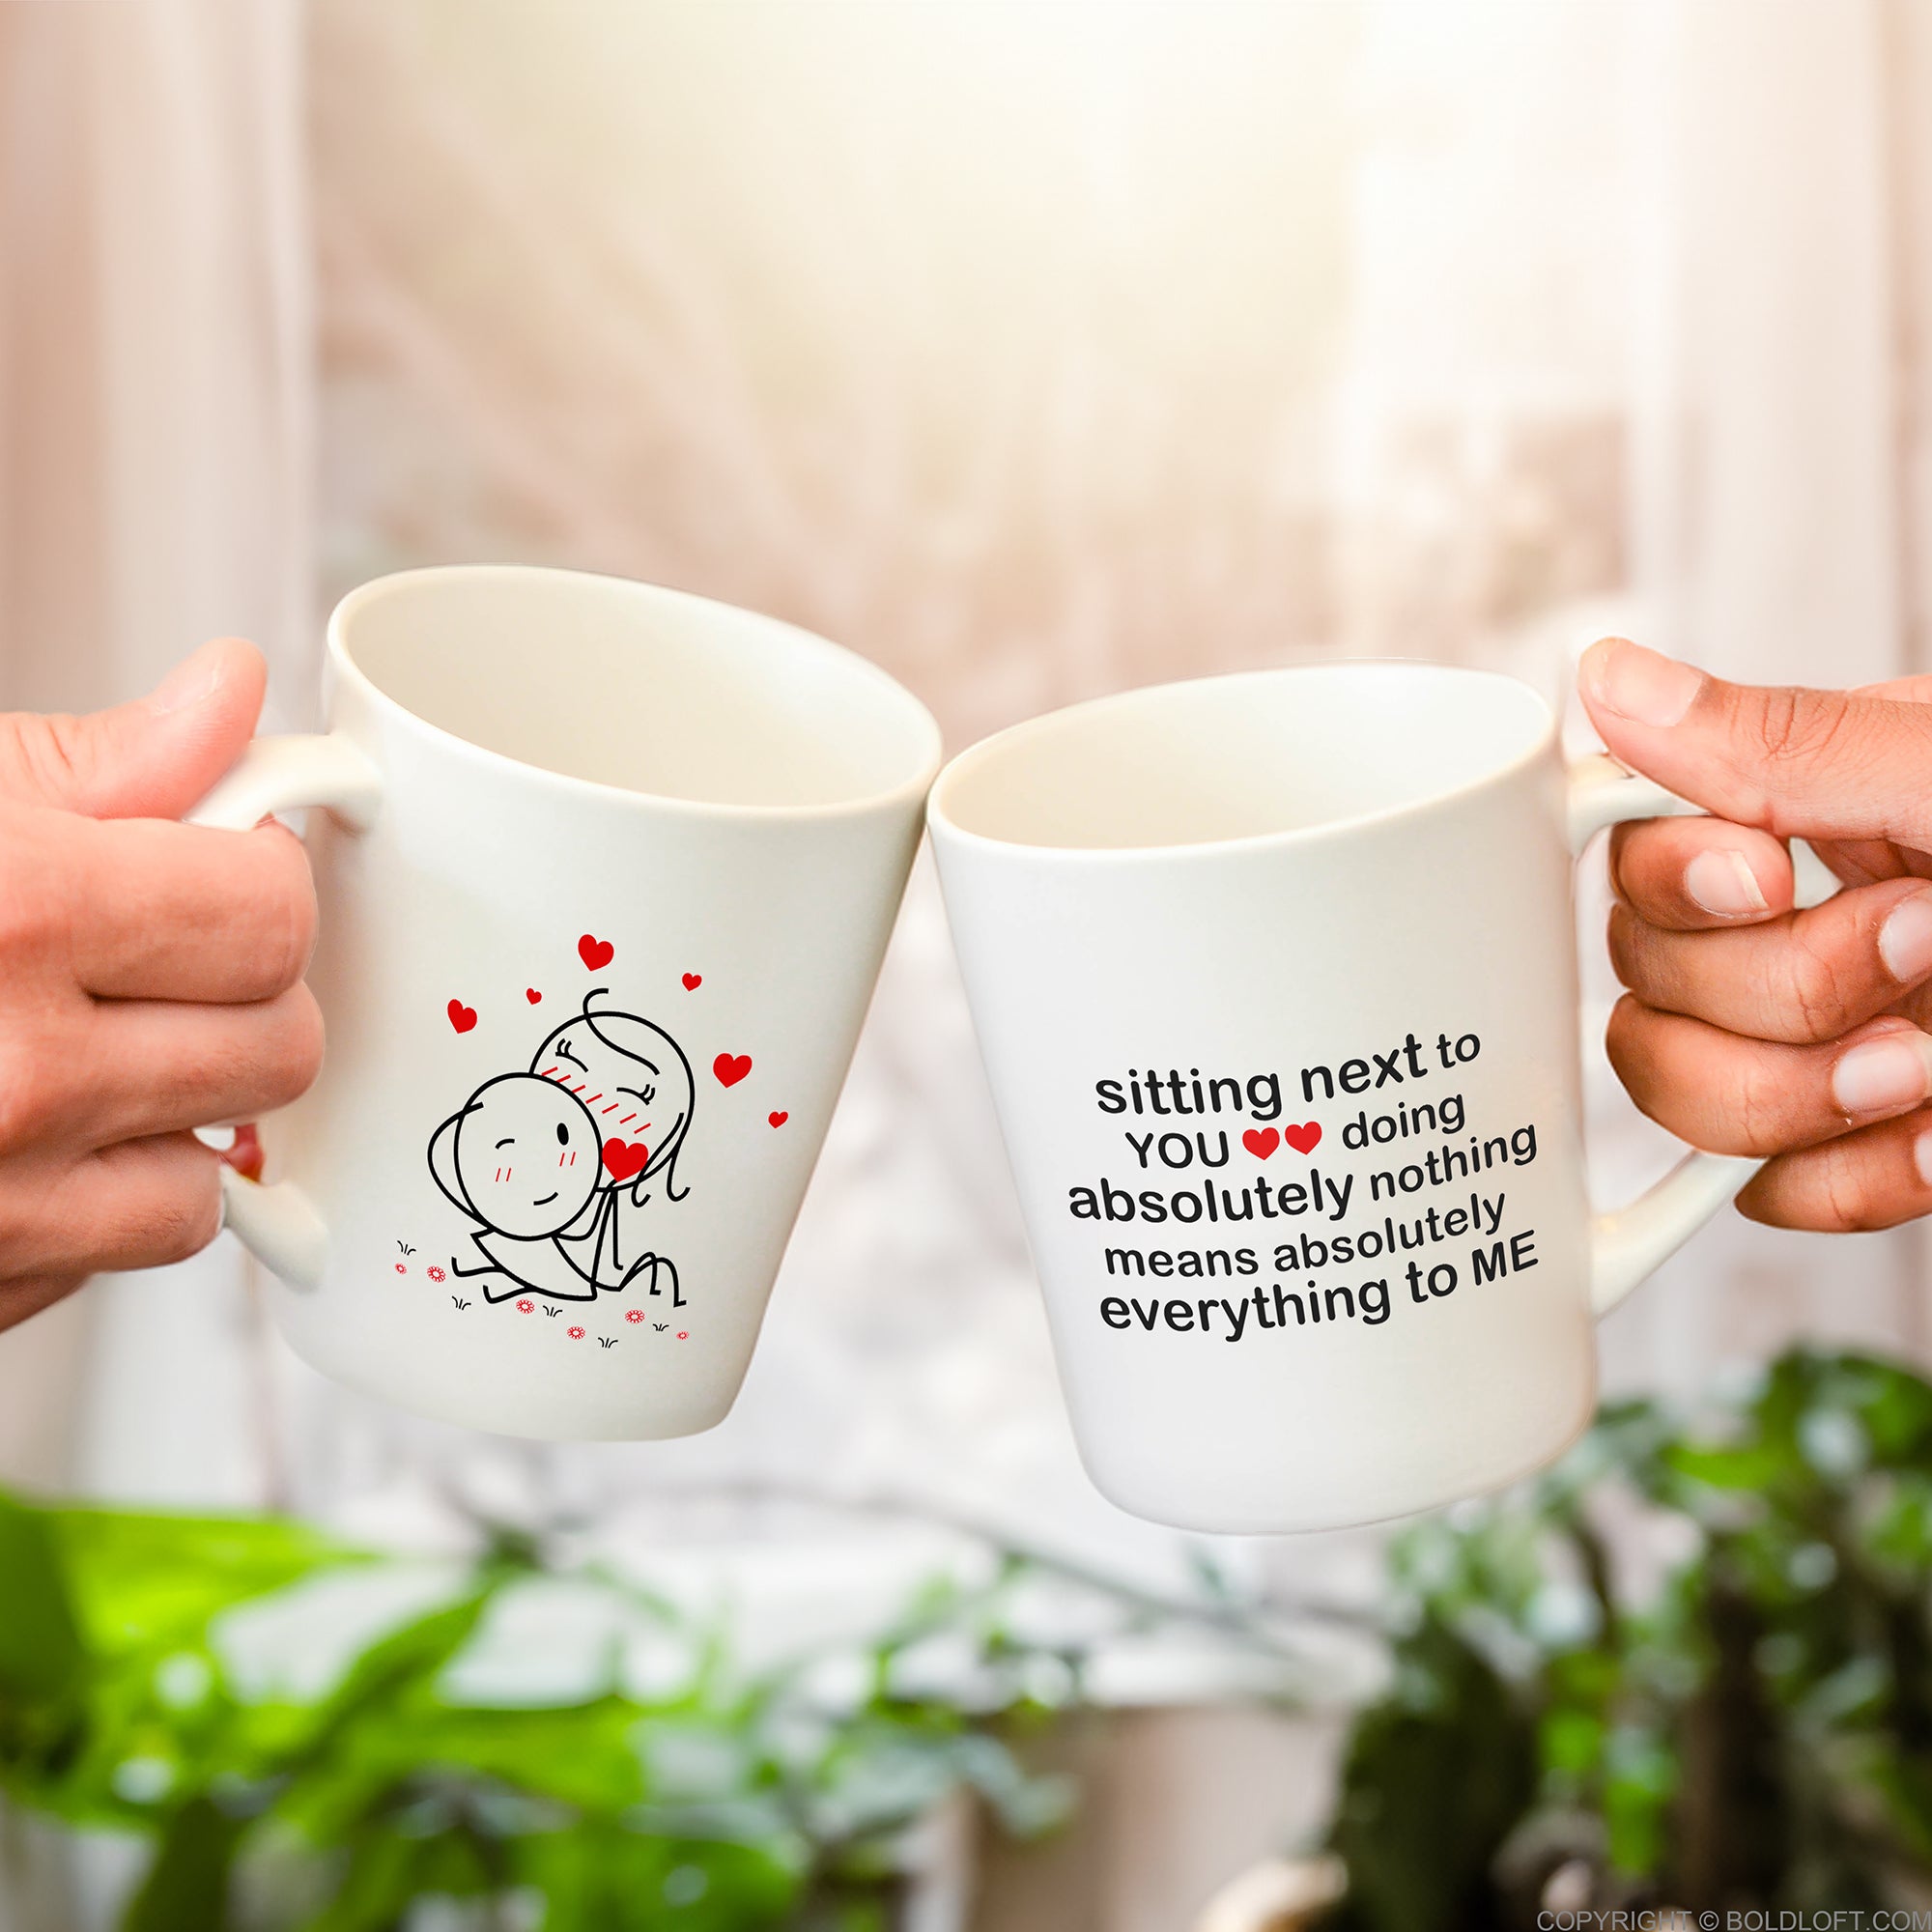 BoldLoft You Mean Everything to Me Couple Mugs-His and hers mugs with love quotes